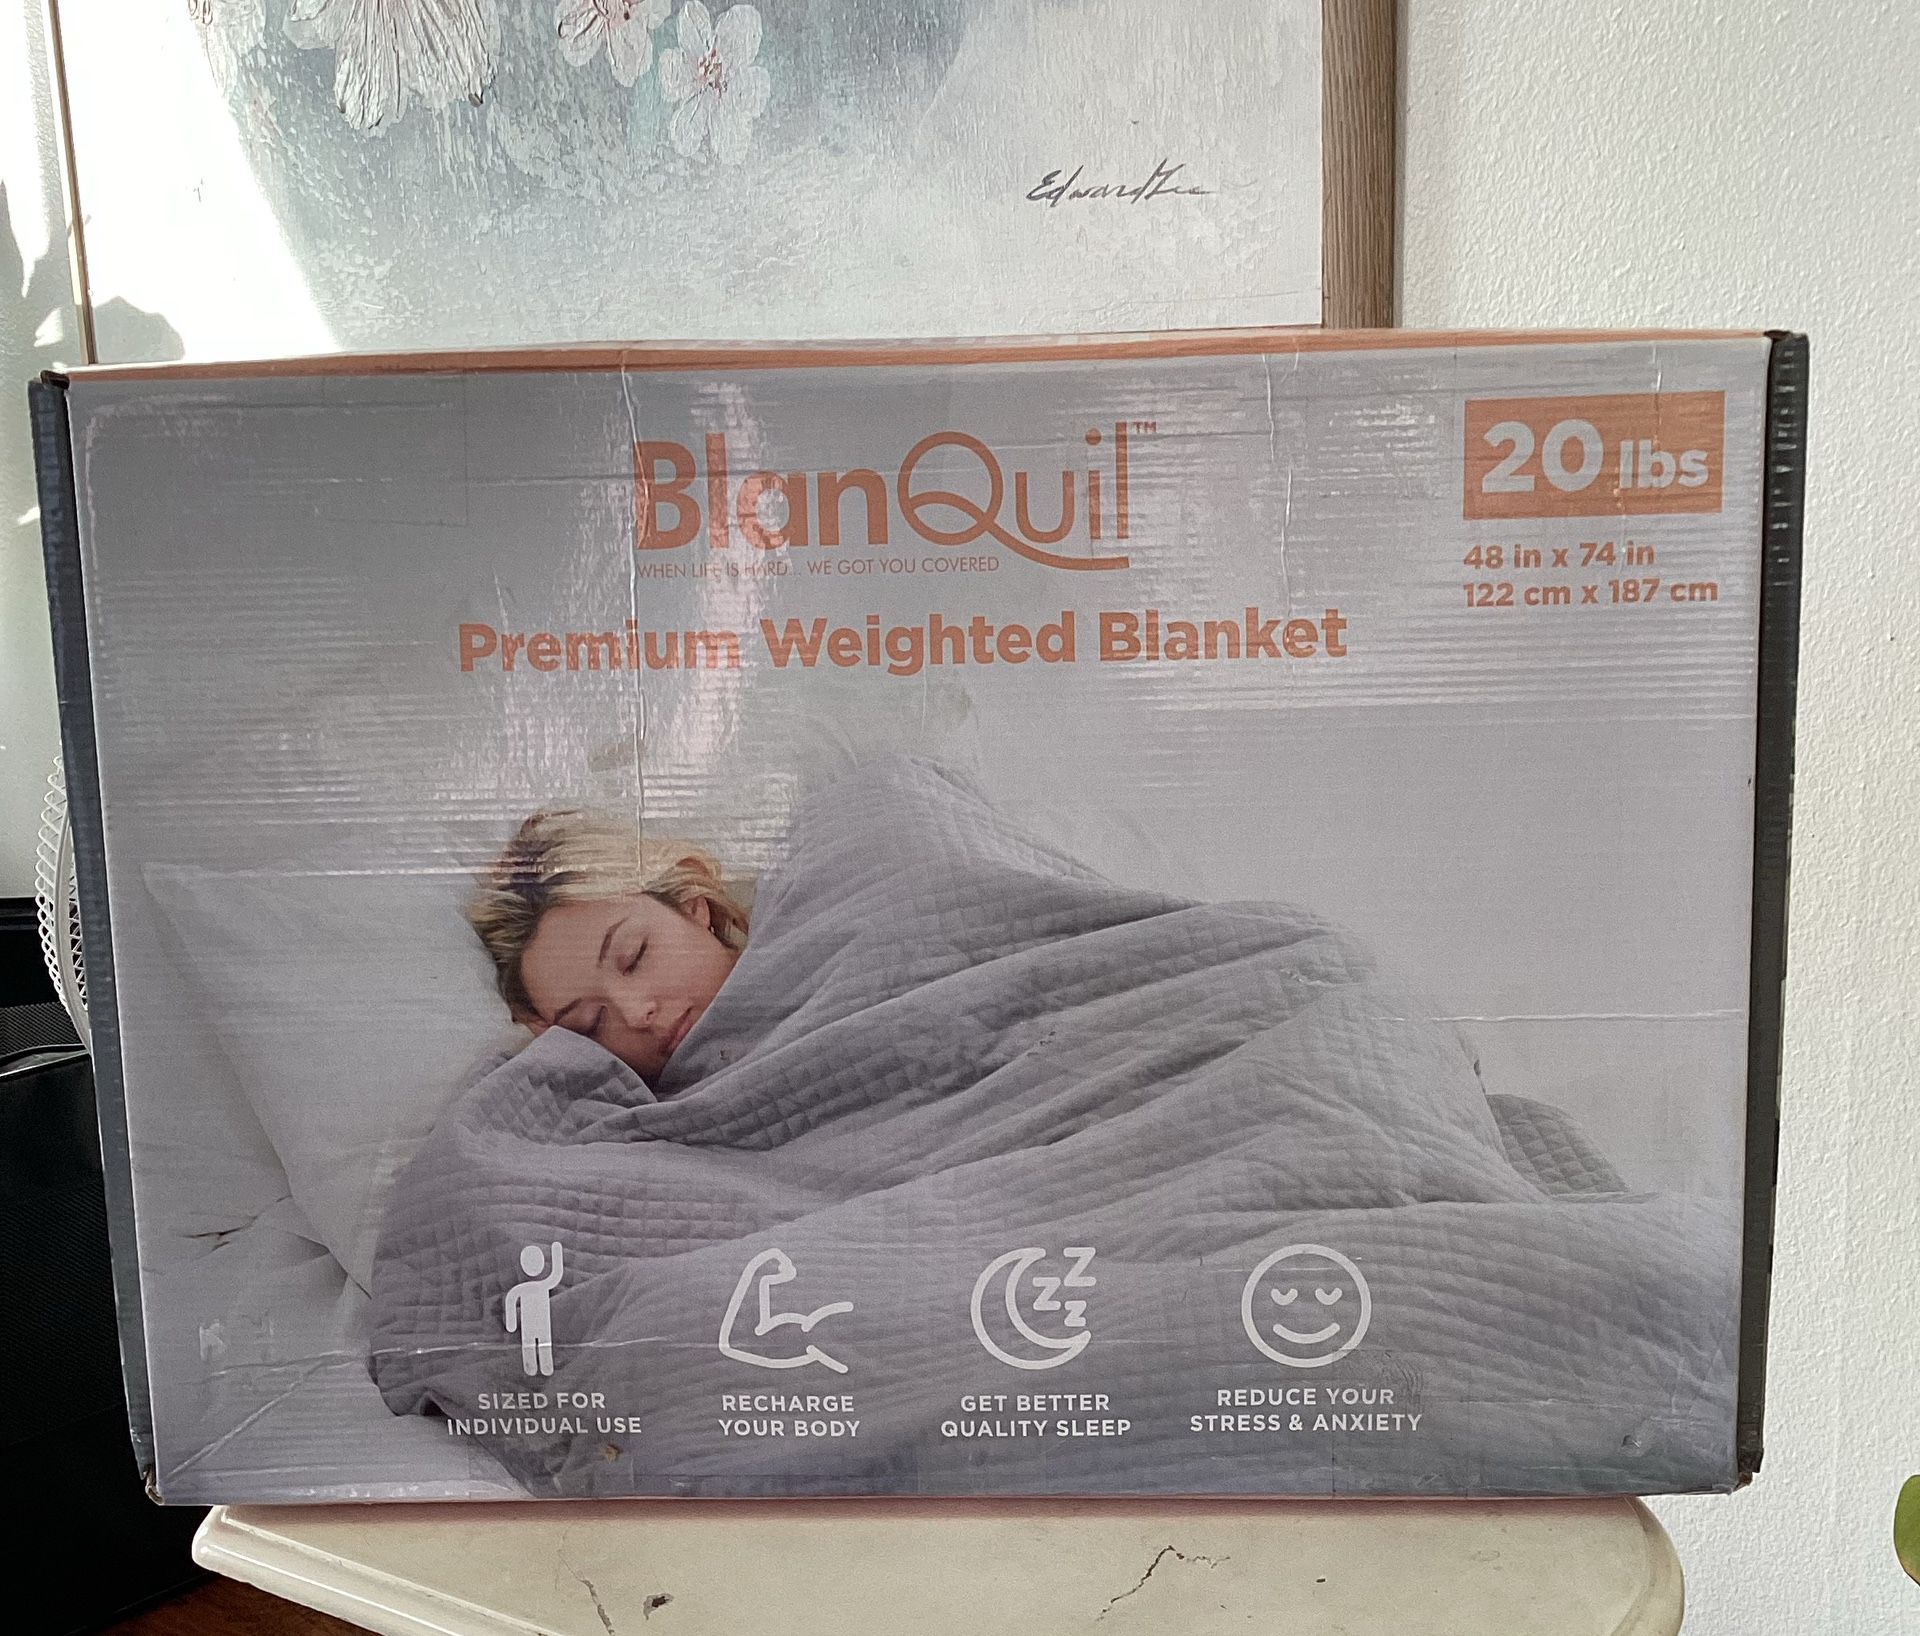 Blanquil Quilted Weighted Blanket